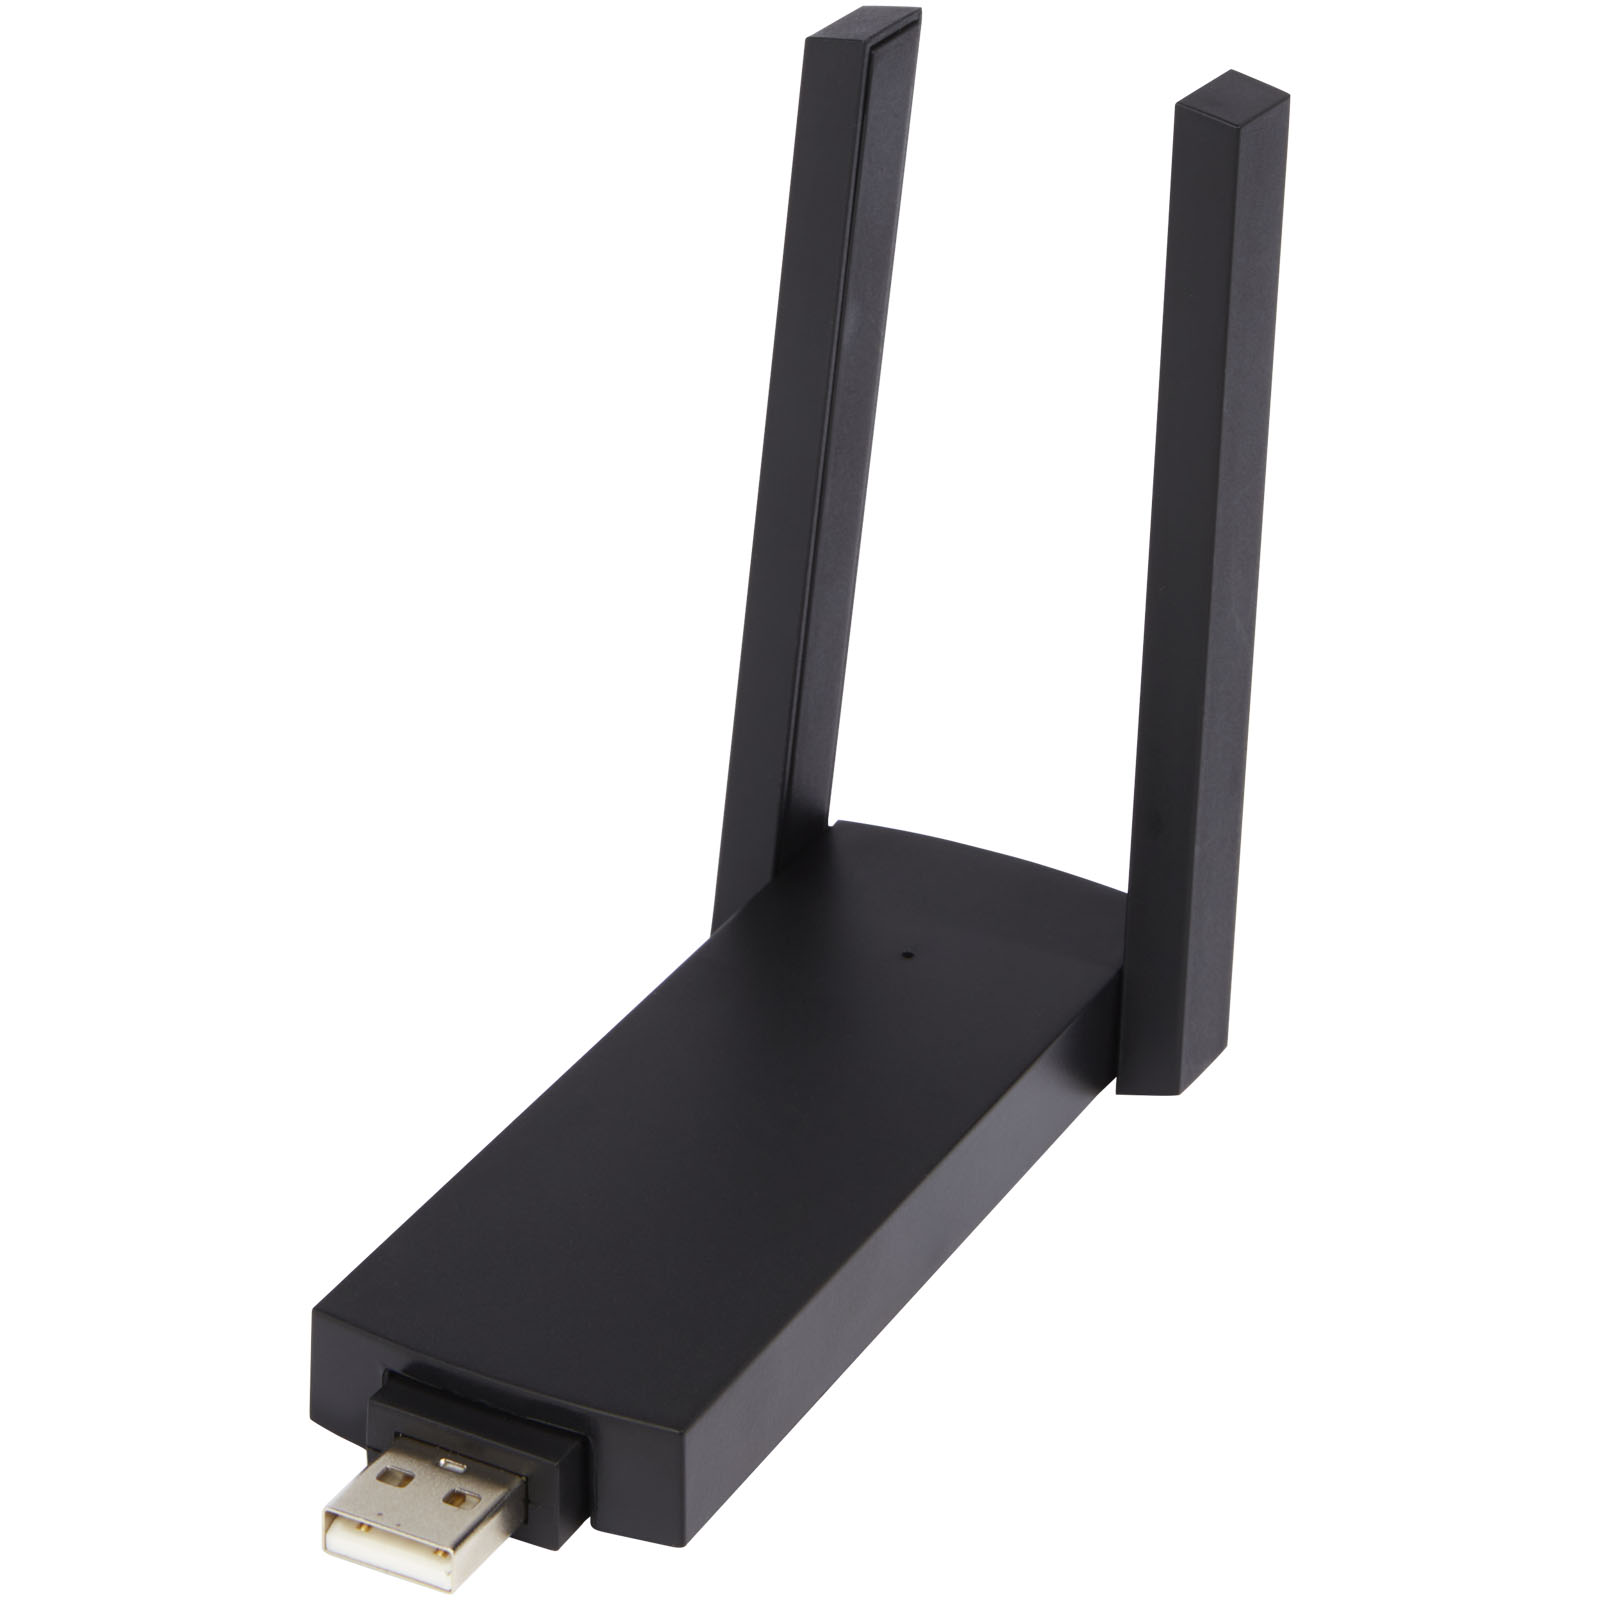 Computer Accessories - ADAPT single band Wi-Fi extender